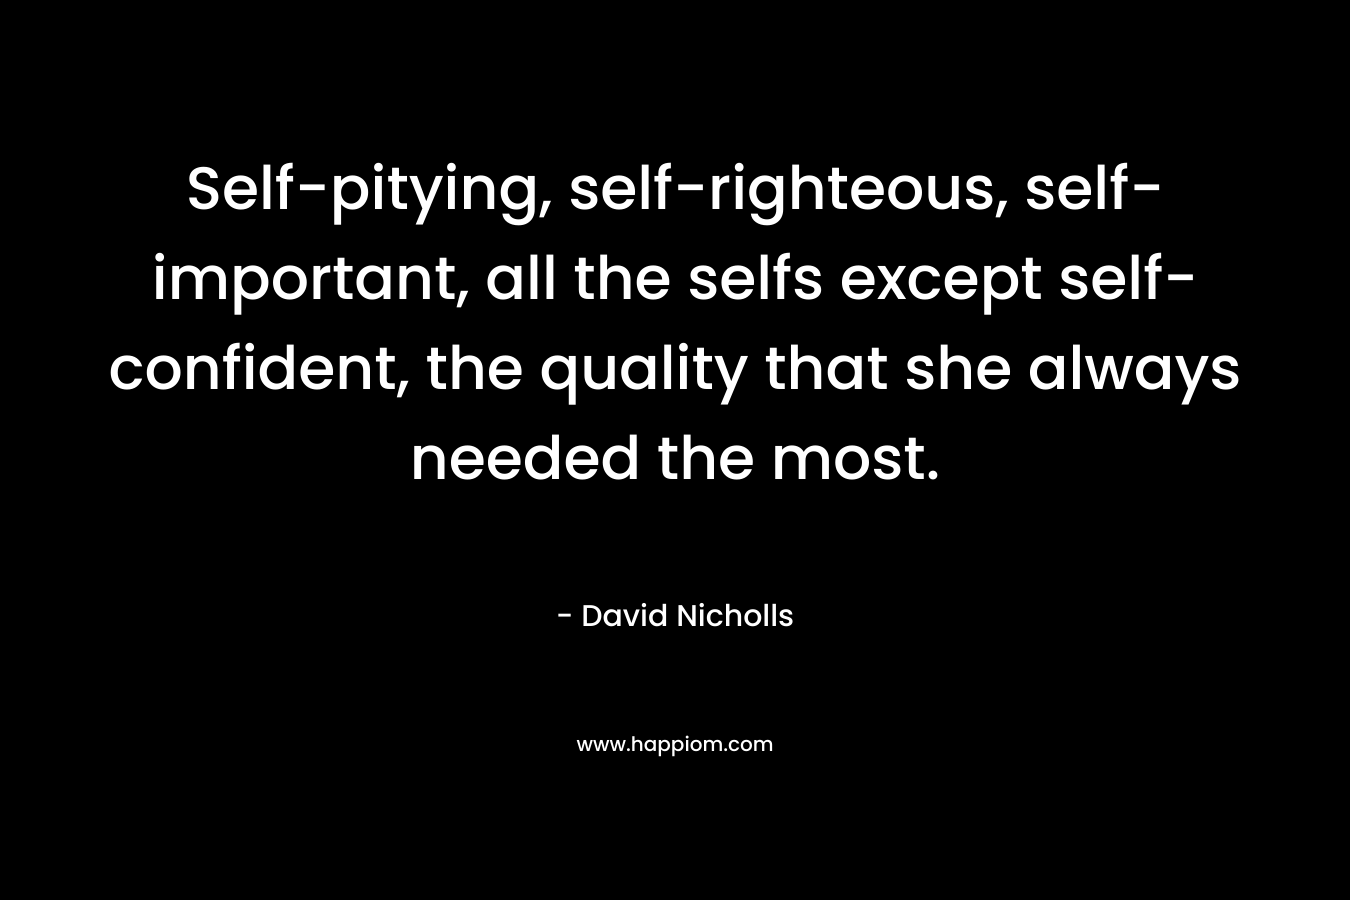 Self-pitying, self-righteous, self-important, all the selfs except self-confident, the quality that she always needed the most. – David Nicholls